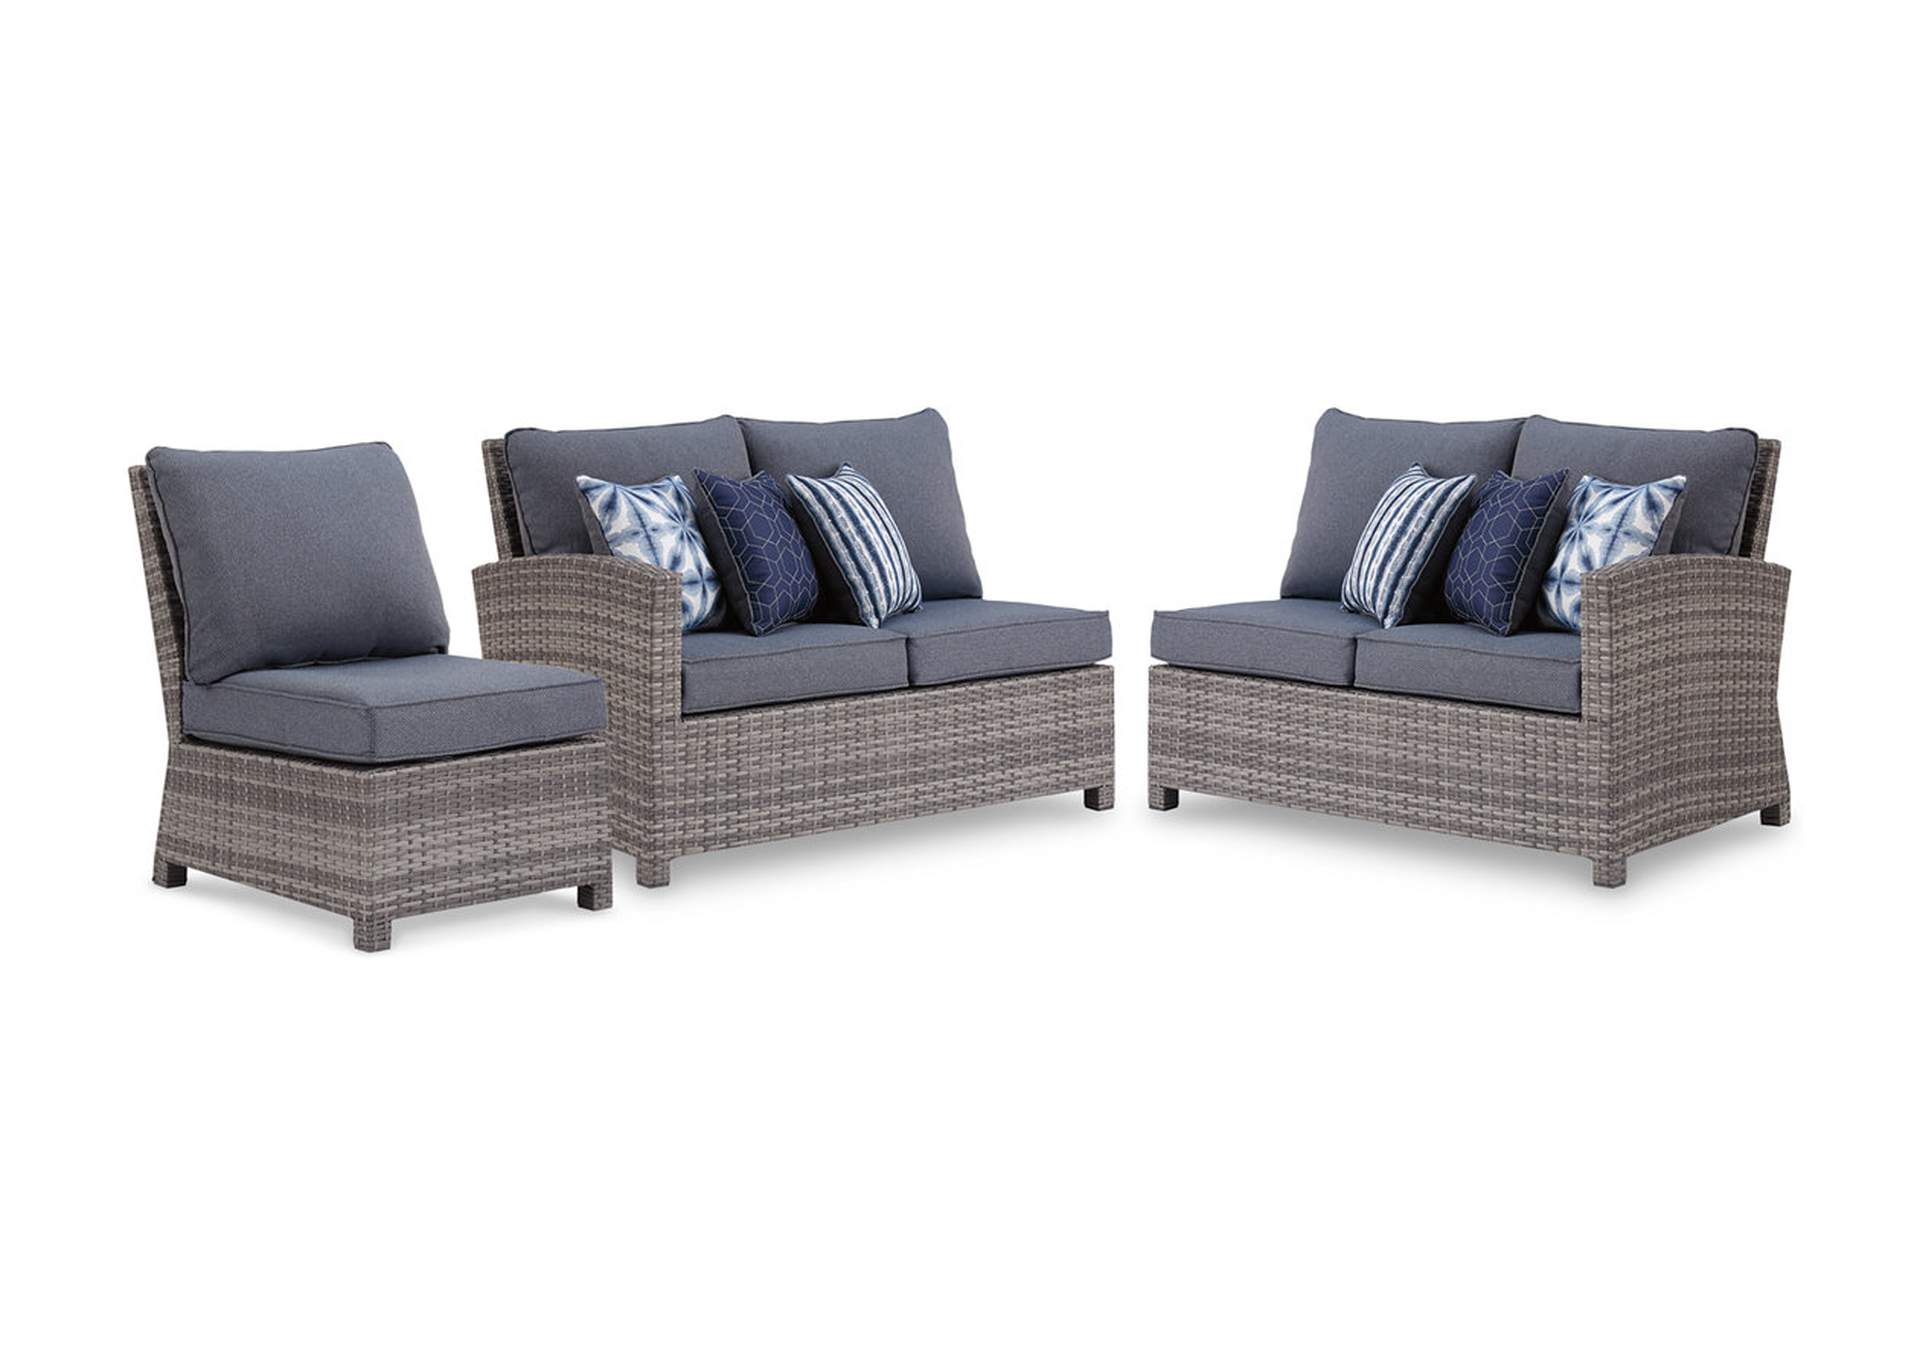 Salem Beach 2-Piece Outdoor Sectional with Chair